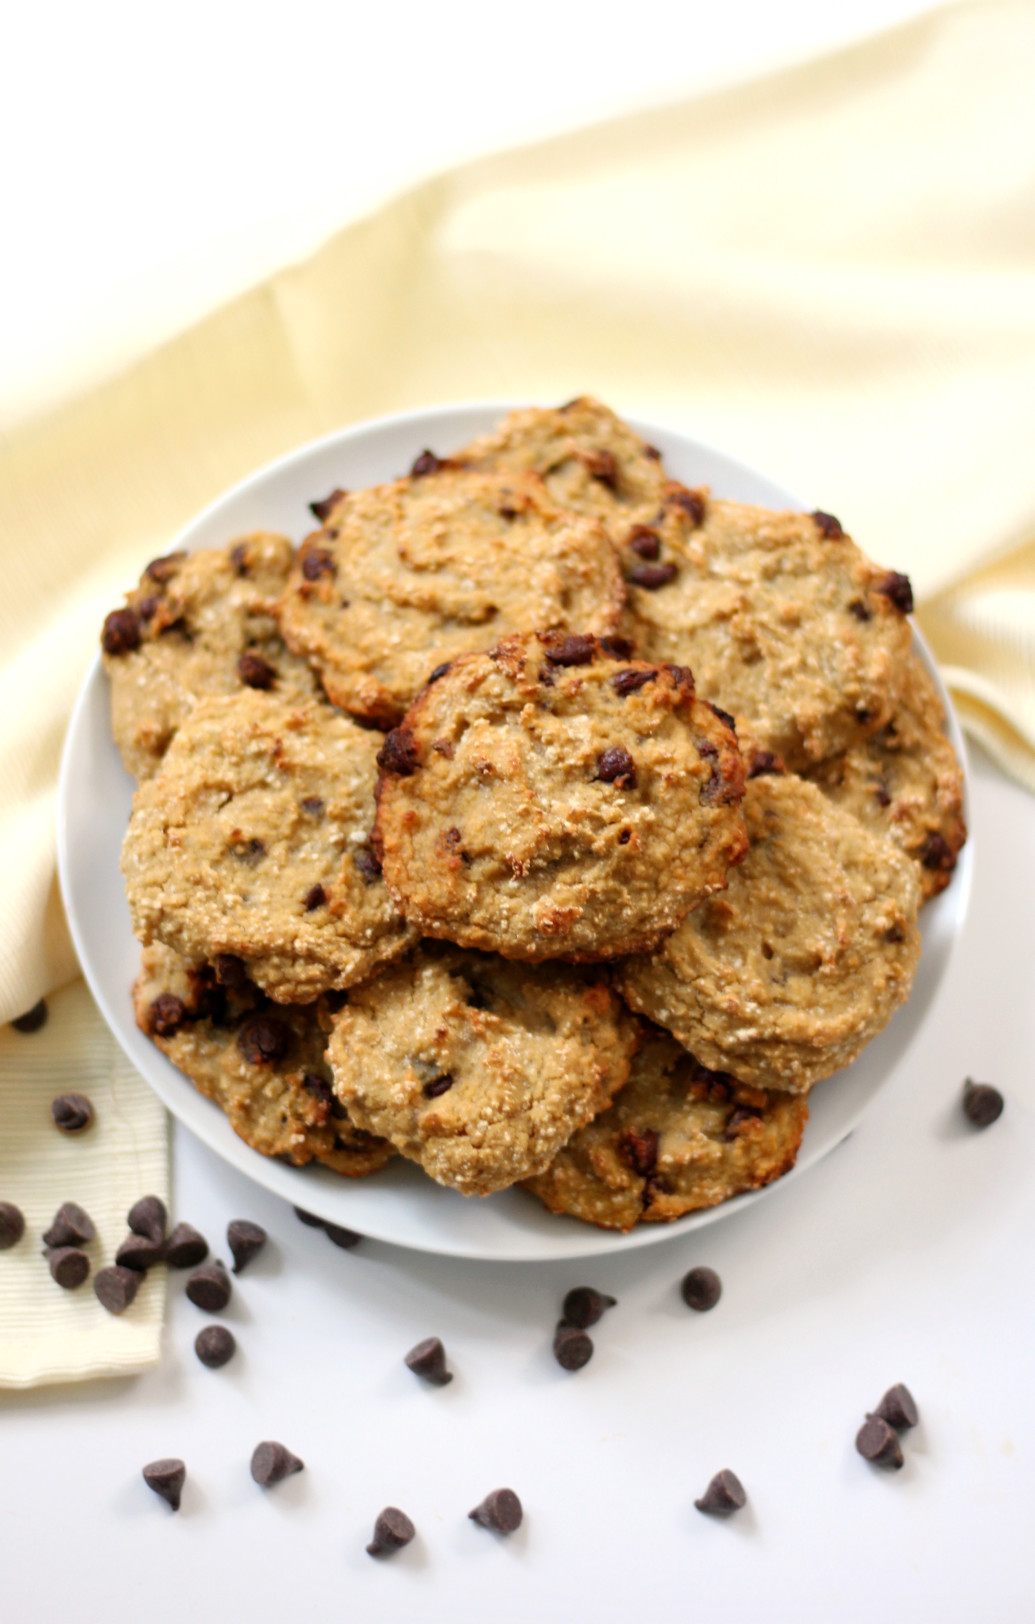 Quinoa Chocolate Chip Cookies | Strength and Sunshine @RebeccaGF666 The classic chocolate chip cookie with the protein punch of quinoa. Healthy, gluten-free, vegan, quinoa chocolate chip cookies that will fool anyone into thinking they're eating a decadent dessert recipe. These call for a double batch!